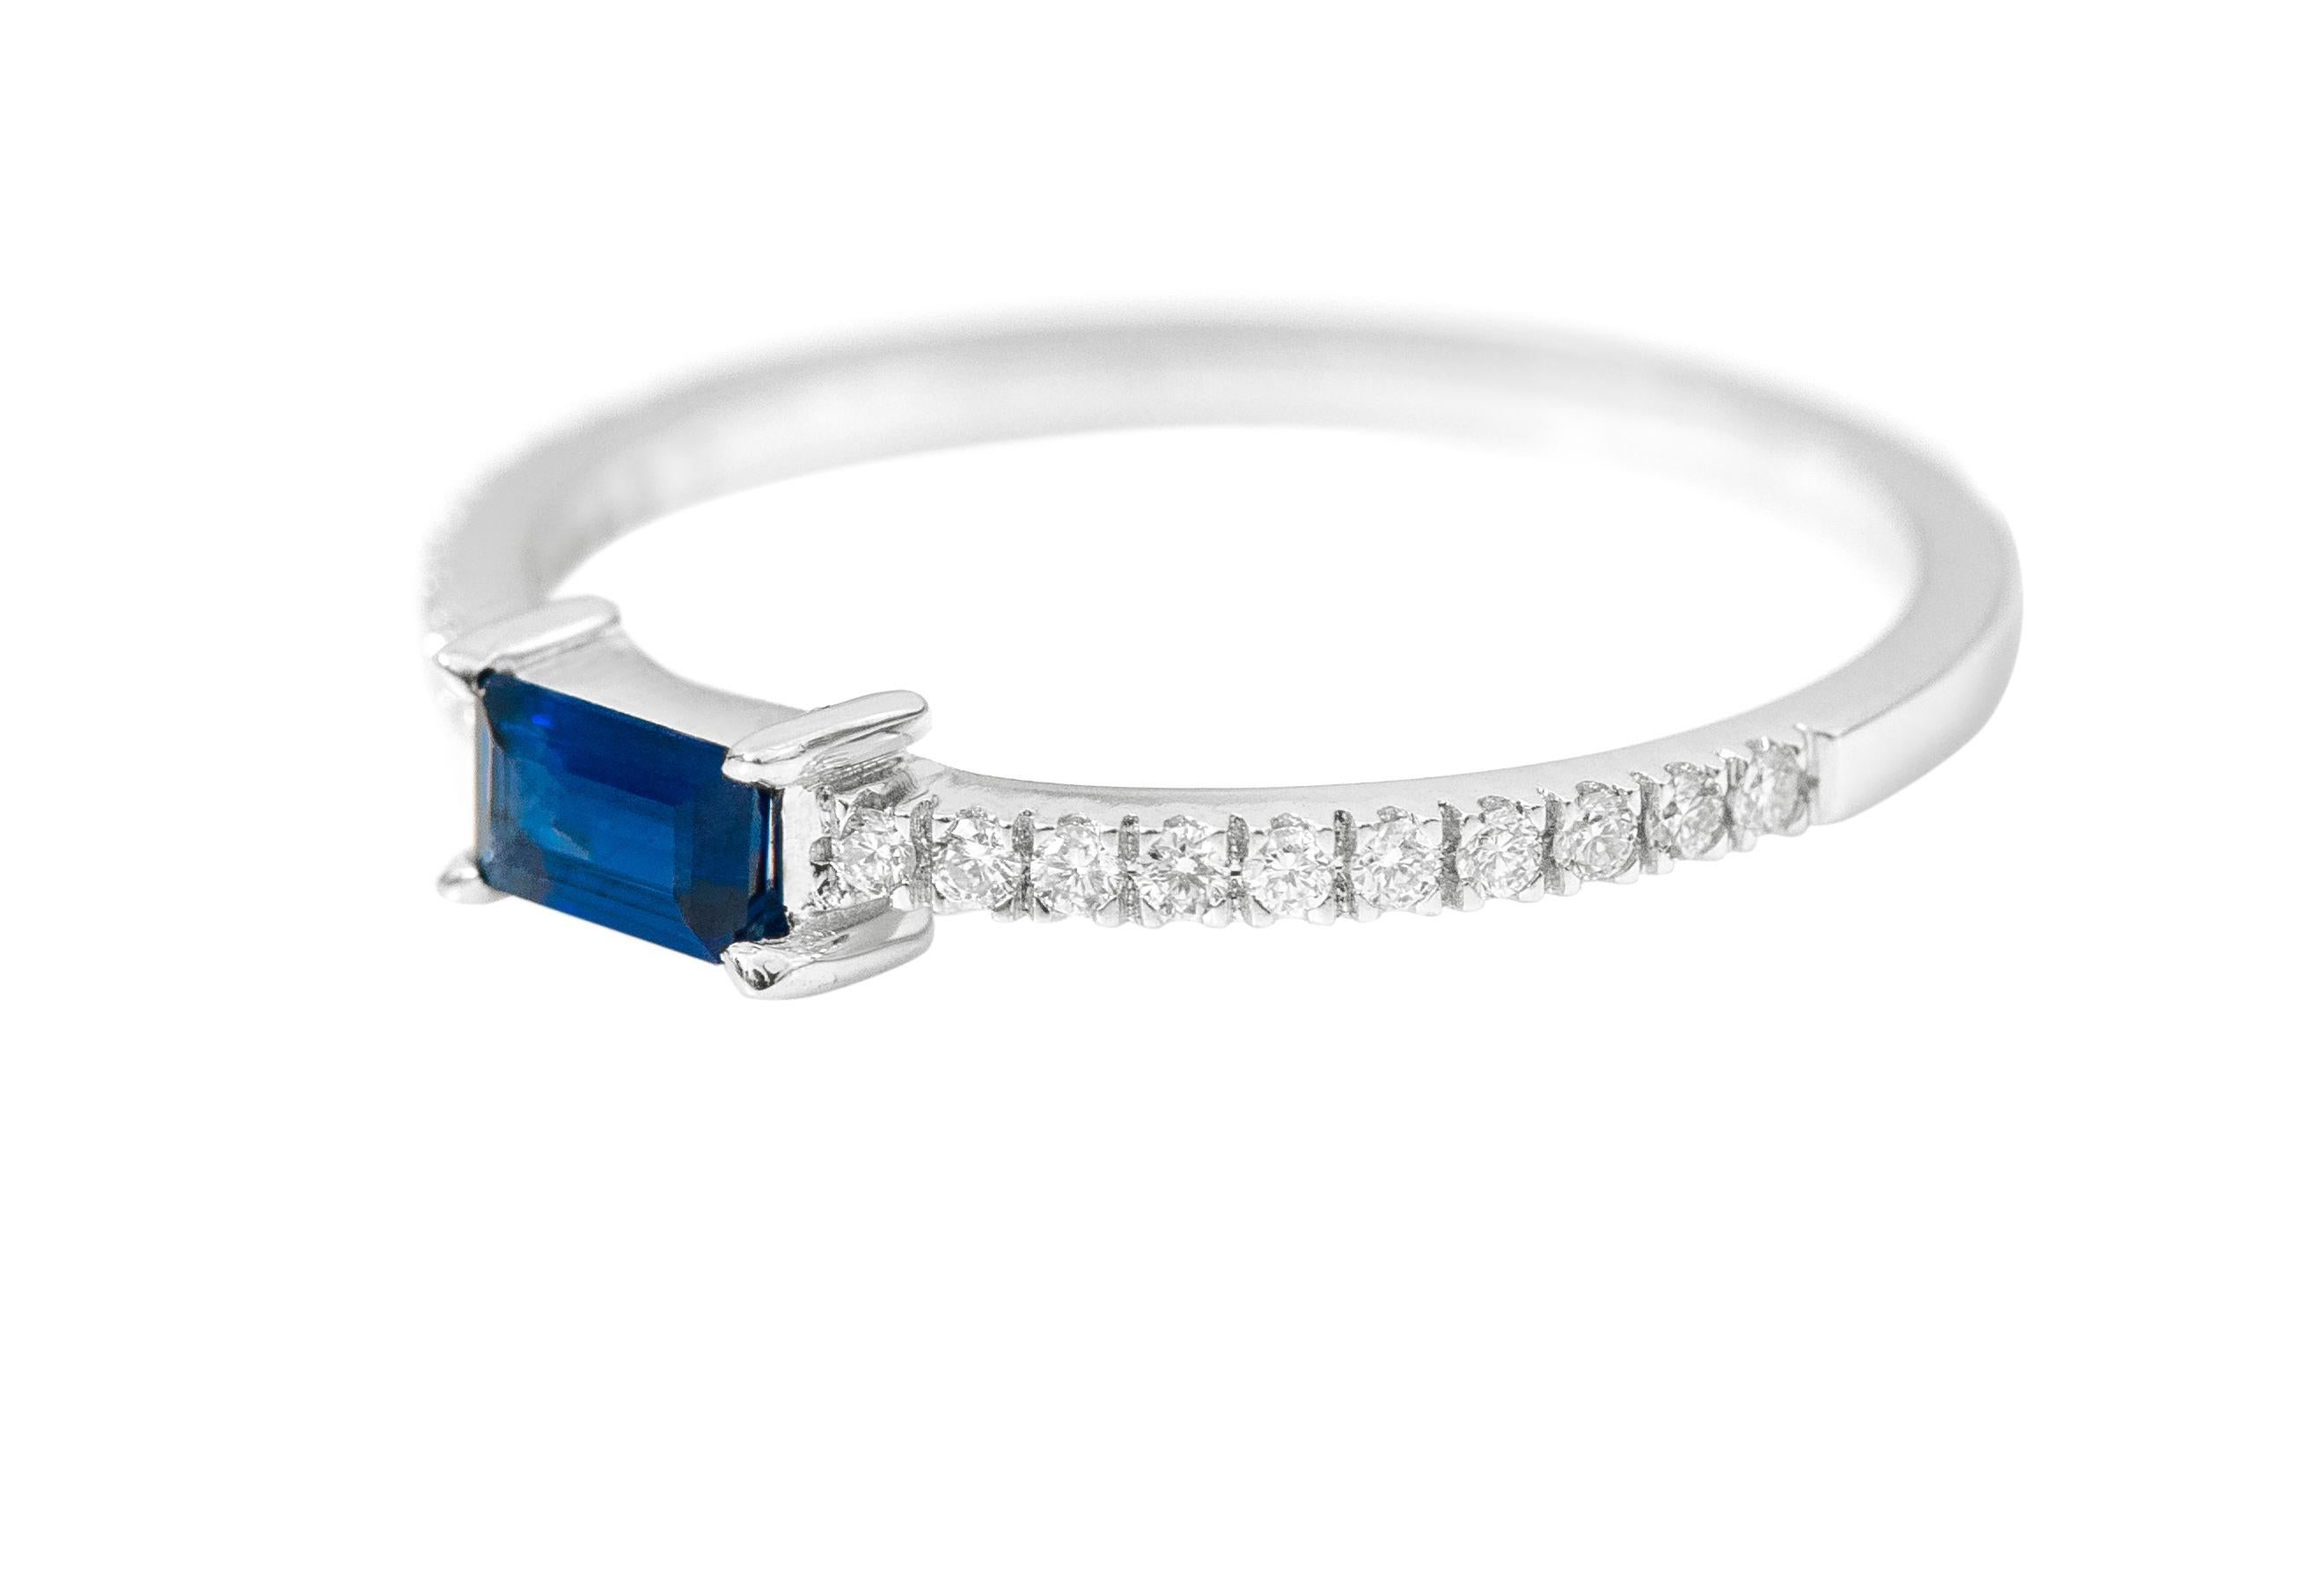 18 Karat White Gold Sapphire and Diamond Solitaire Band Ring

This phenomenal royal blue sapphire and diamond ring is gorgeous. The solitaire baguette-cut sapphire in eagle prong box setting in rose gold is perfect. The thin band of half pave-set